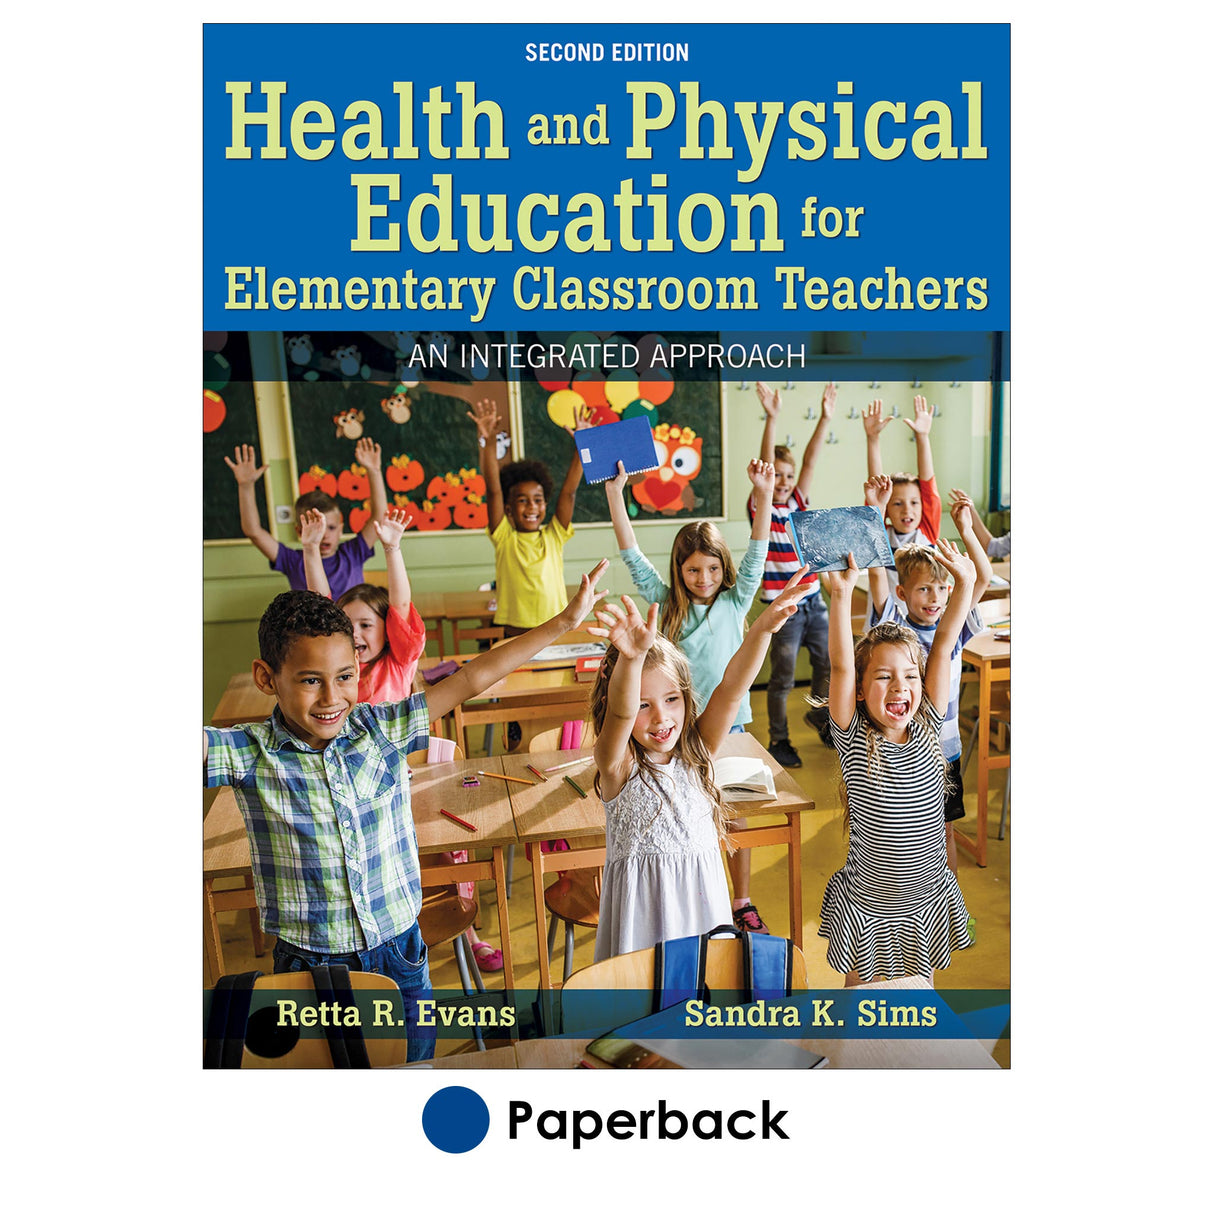 Health and Physical Education for Elementary Classroom Teachers 2nd Edition With HKPropel Access